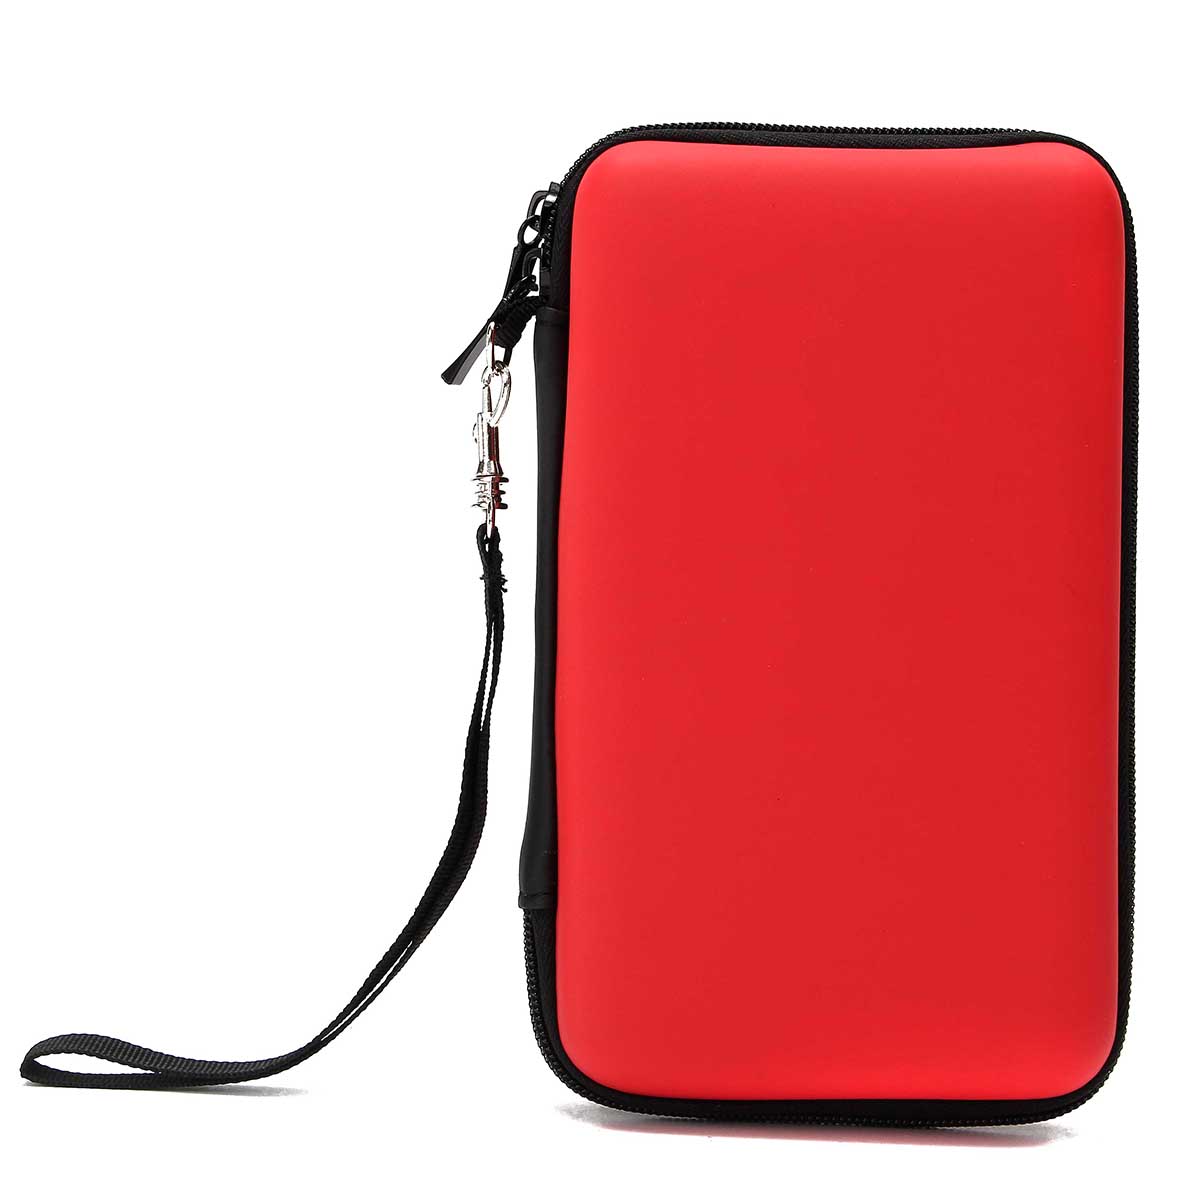 EVA Hard Protective Carrying Case Cover Handle Bag For Nintendo New 2DS LL/XL 13